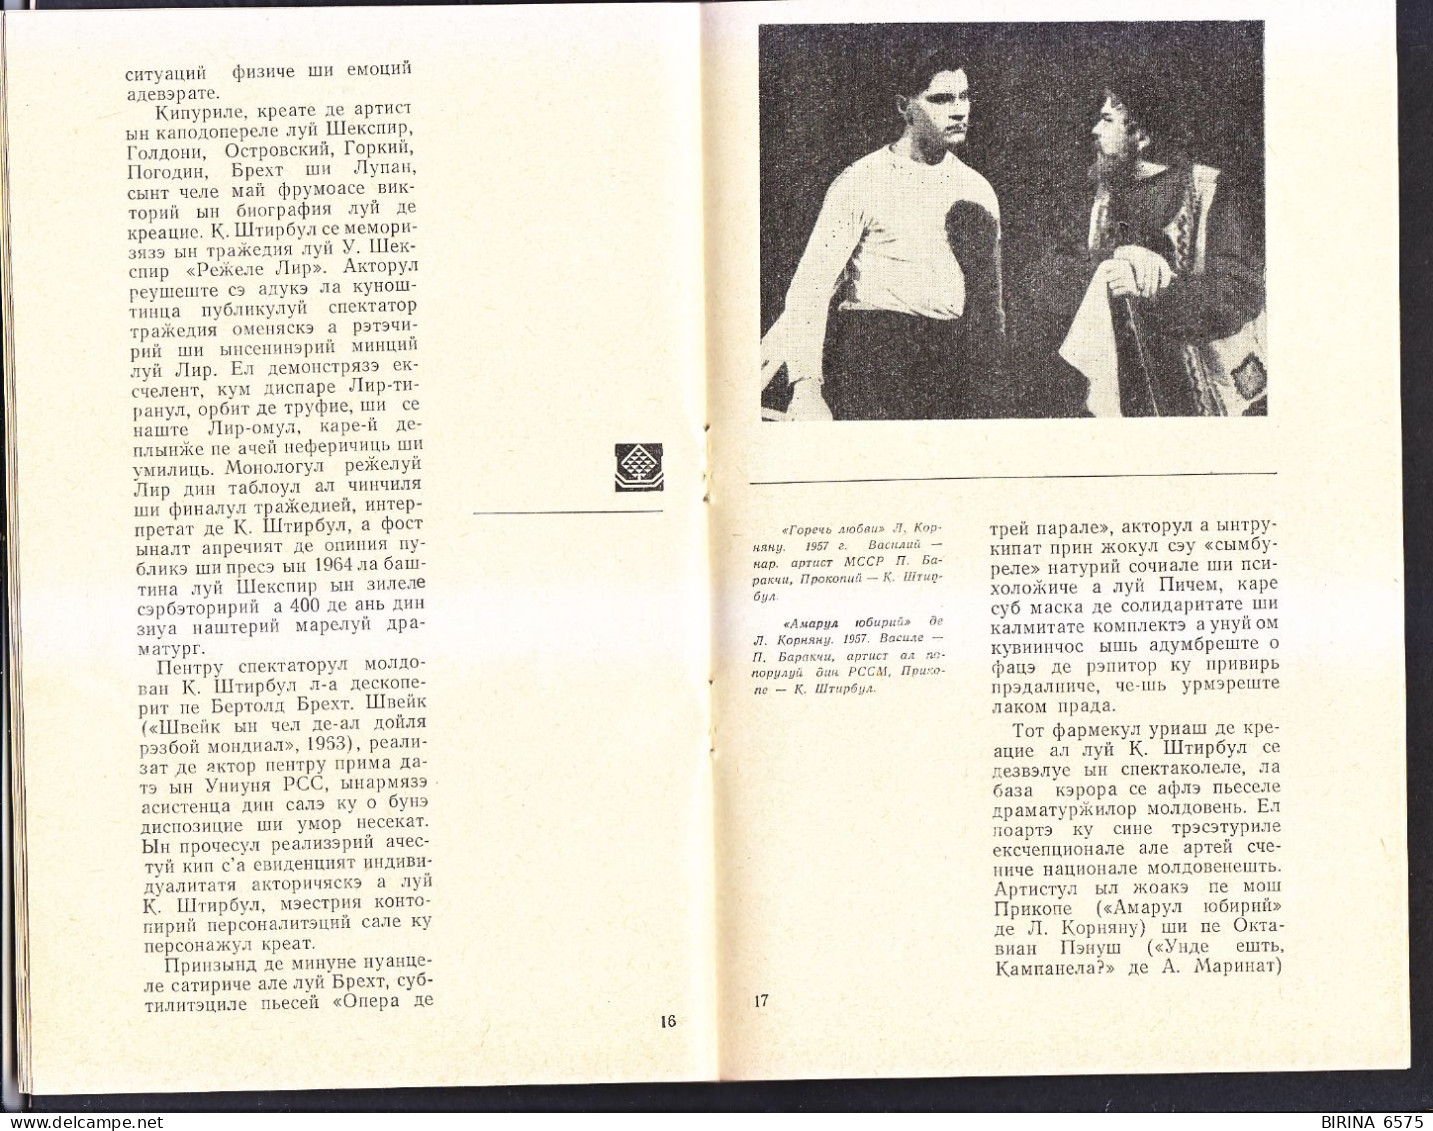 BROCHURE. PEOPLE'S ARTIST OF THE USSR. K. STIRBUL. CHISINAU. IN RUSSIAN AND MOLDOVAN. - 7-29-i - Théâtre